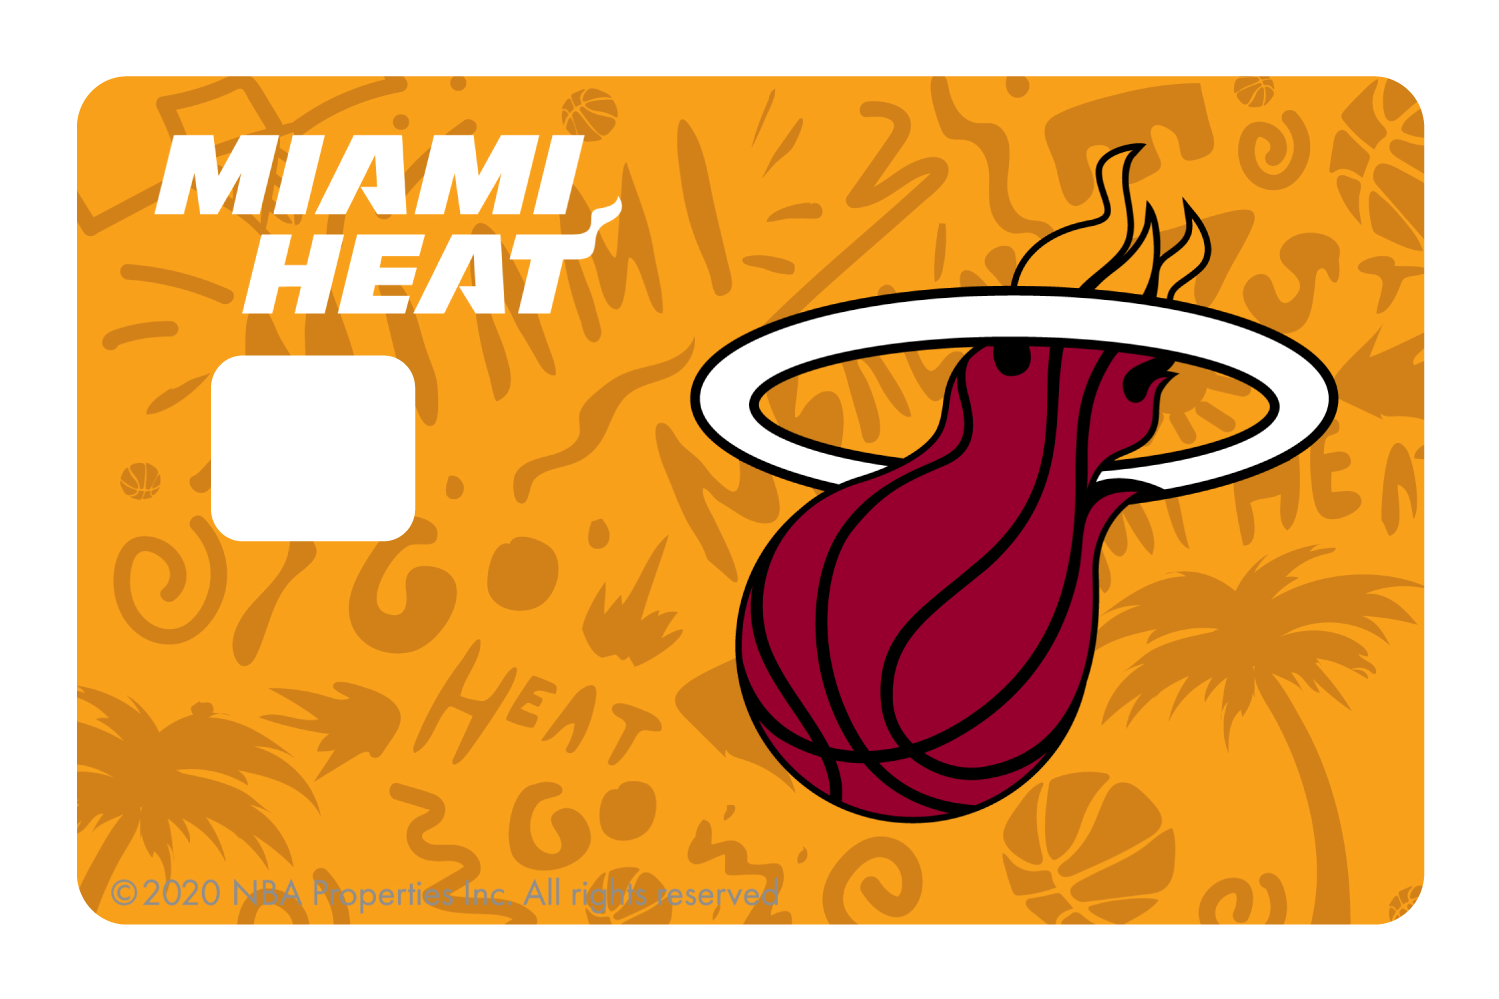 Credit Debit Card Skins | Cucu Covers - Customize Any Bank Card - Miami Heat: Throwback Hardwood Classics Full Cover / Small Chip